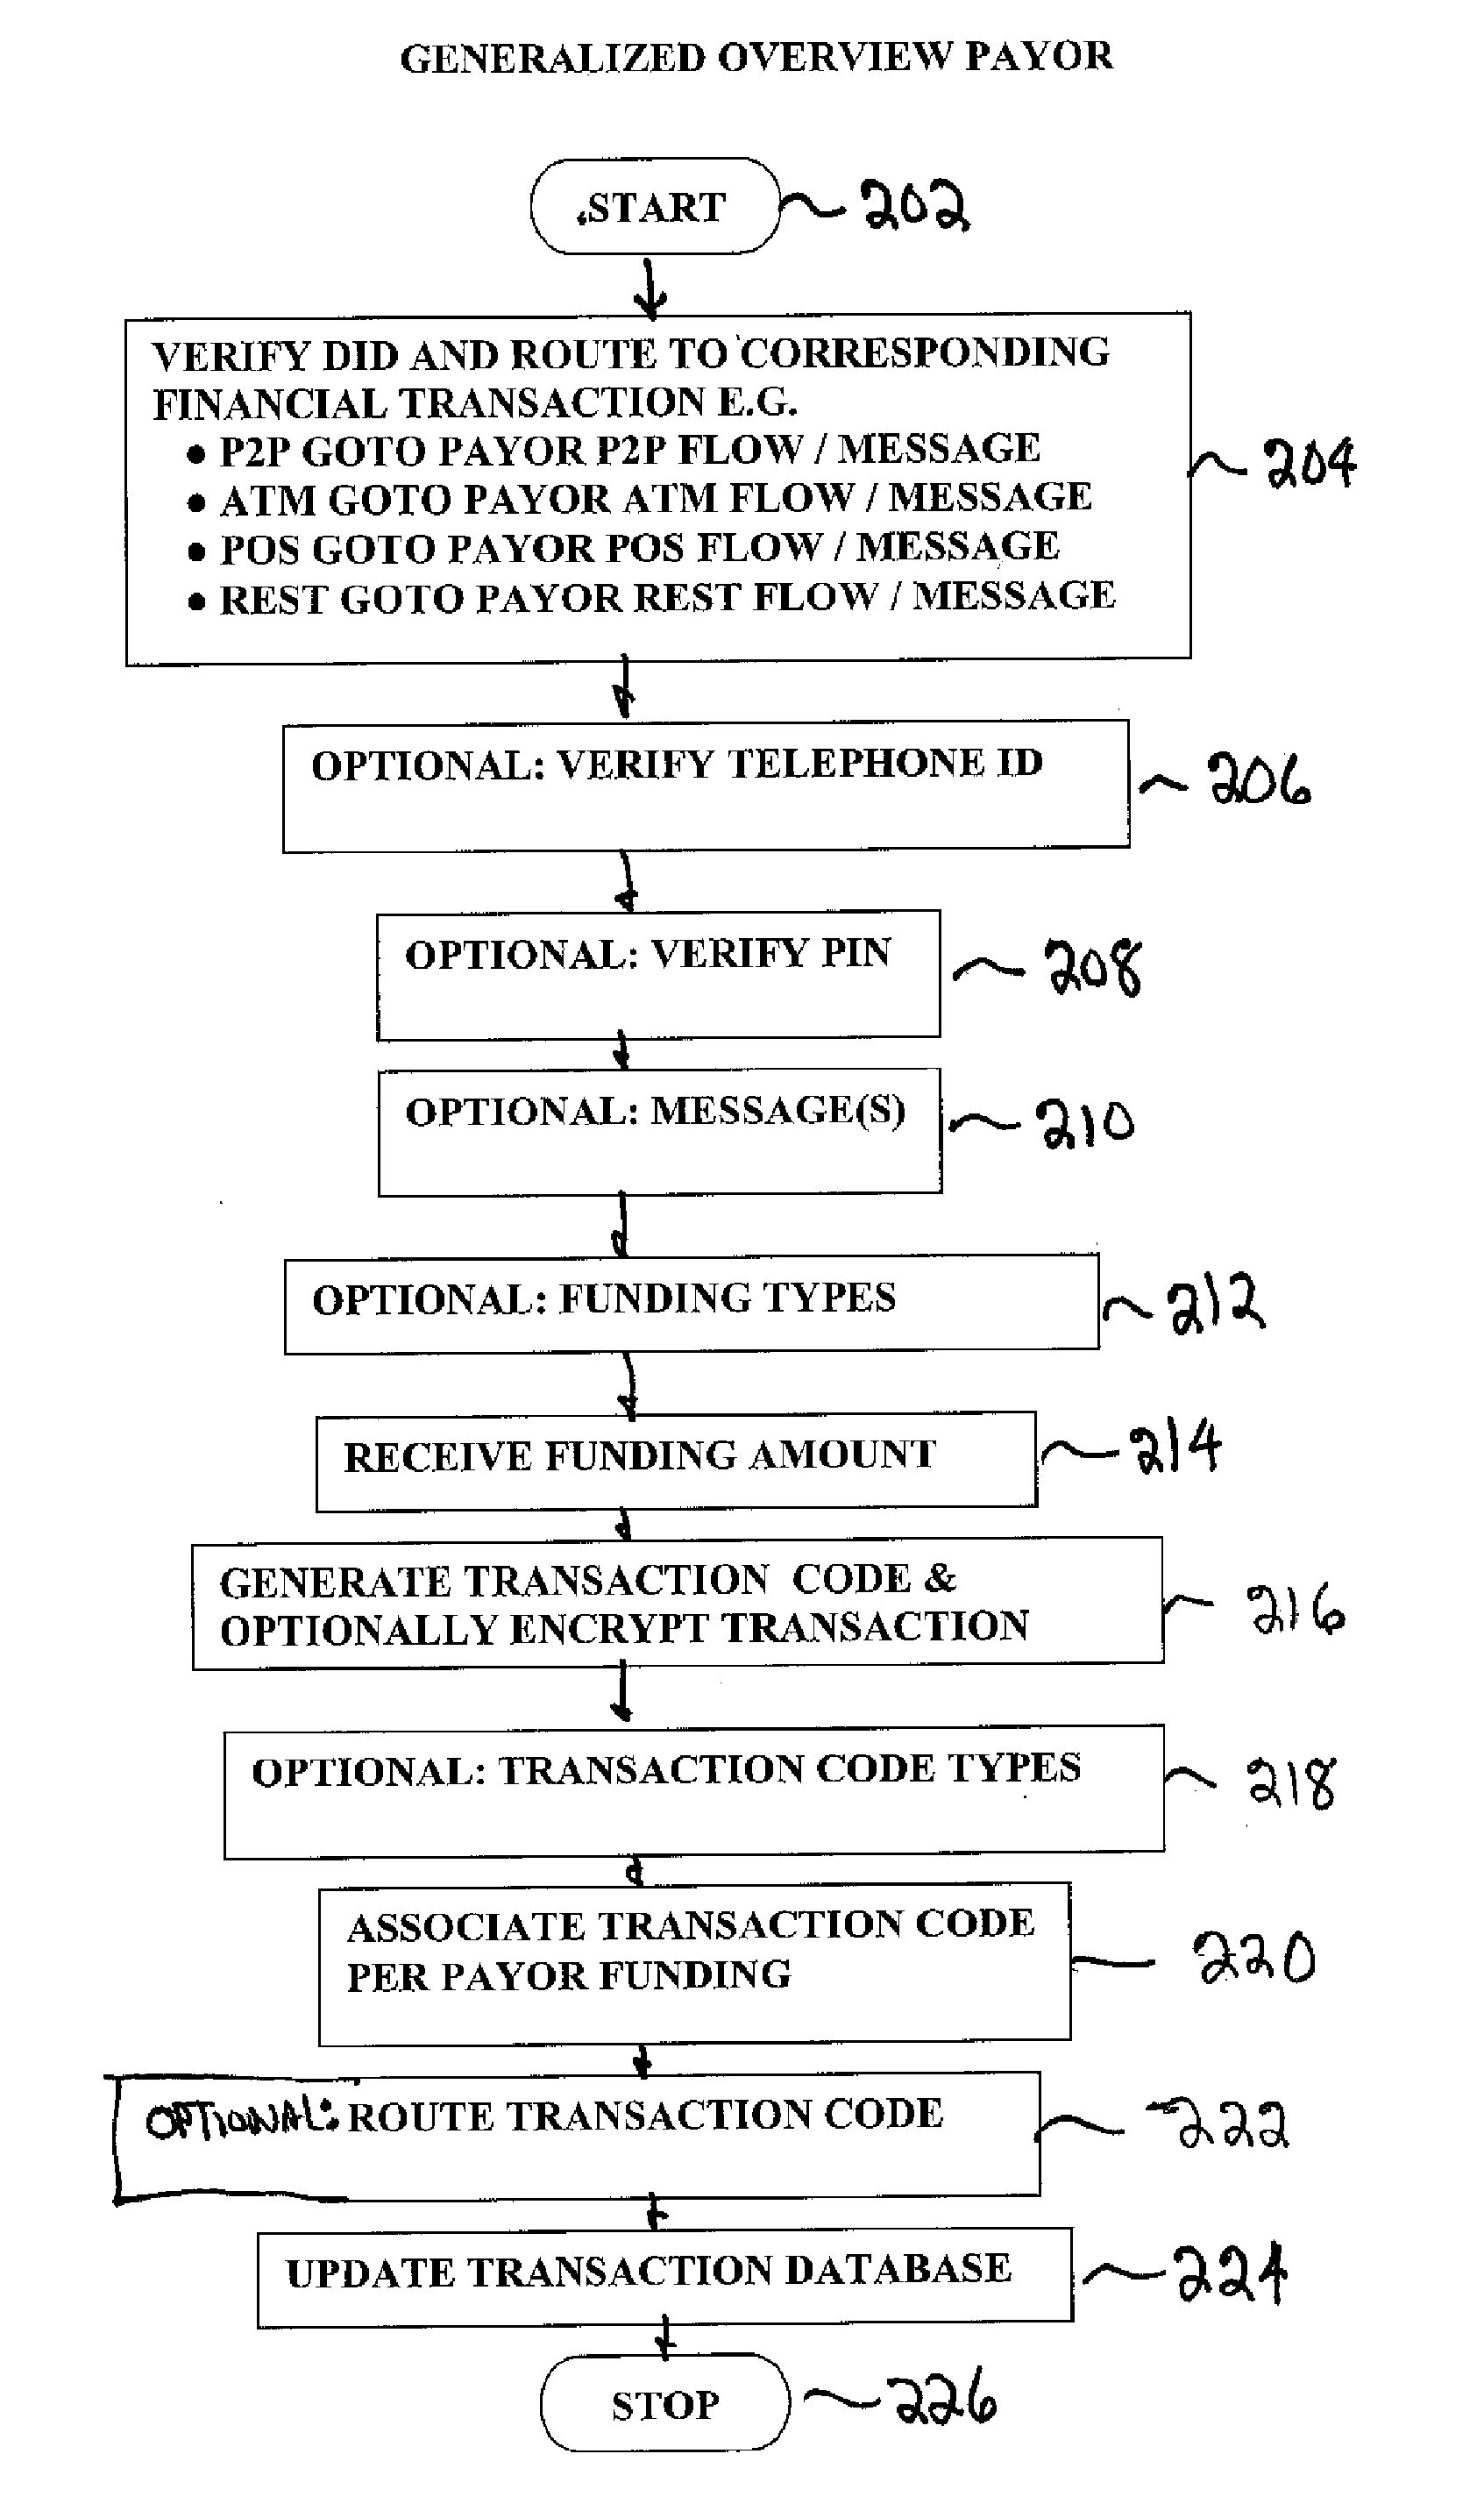 Financial transactions using a communication device